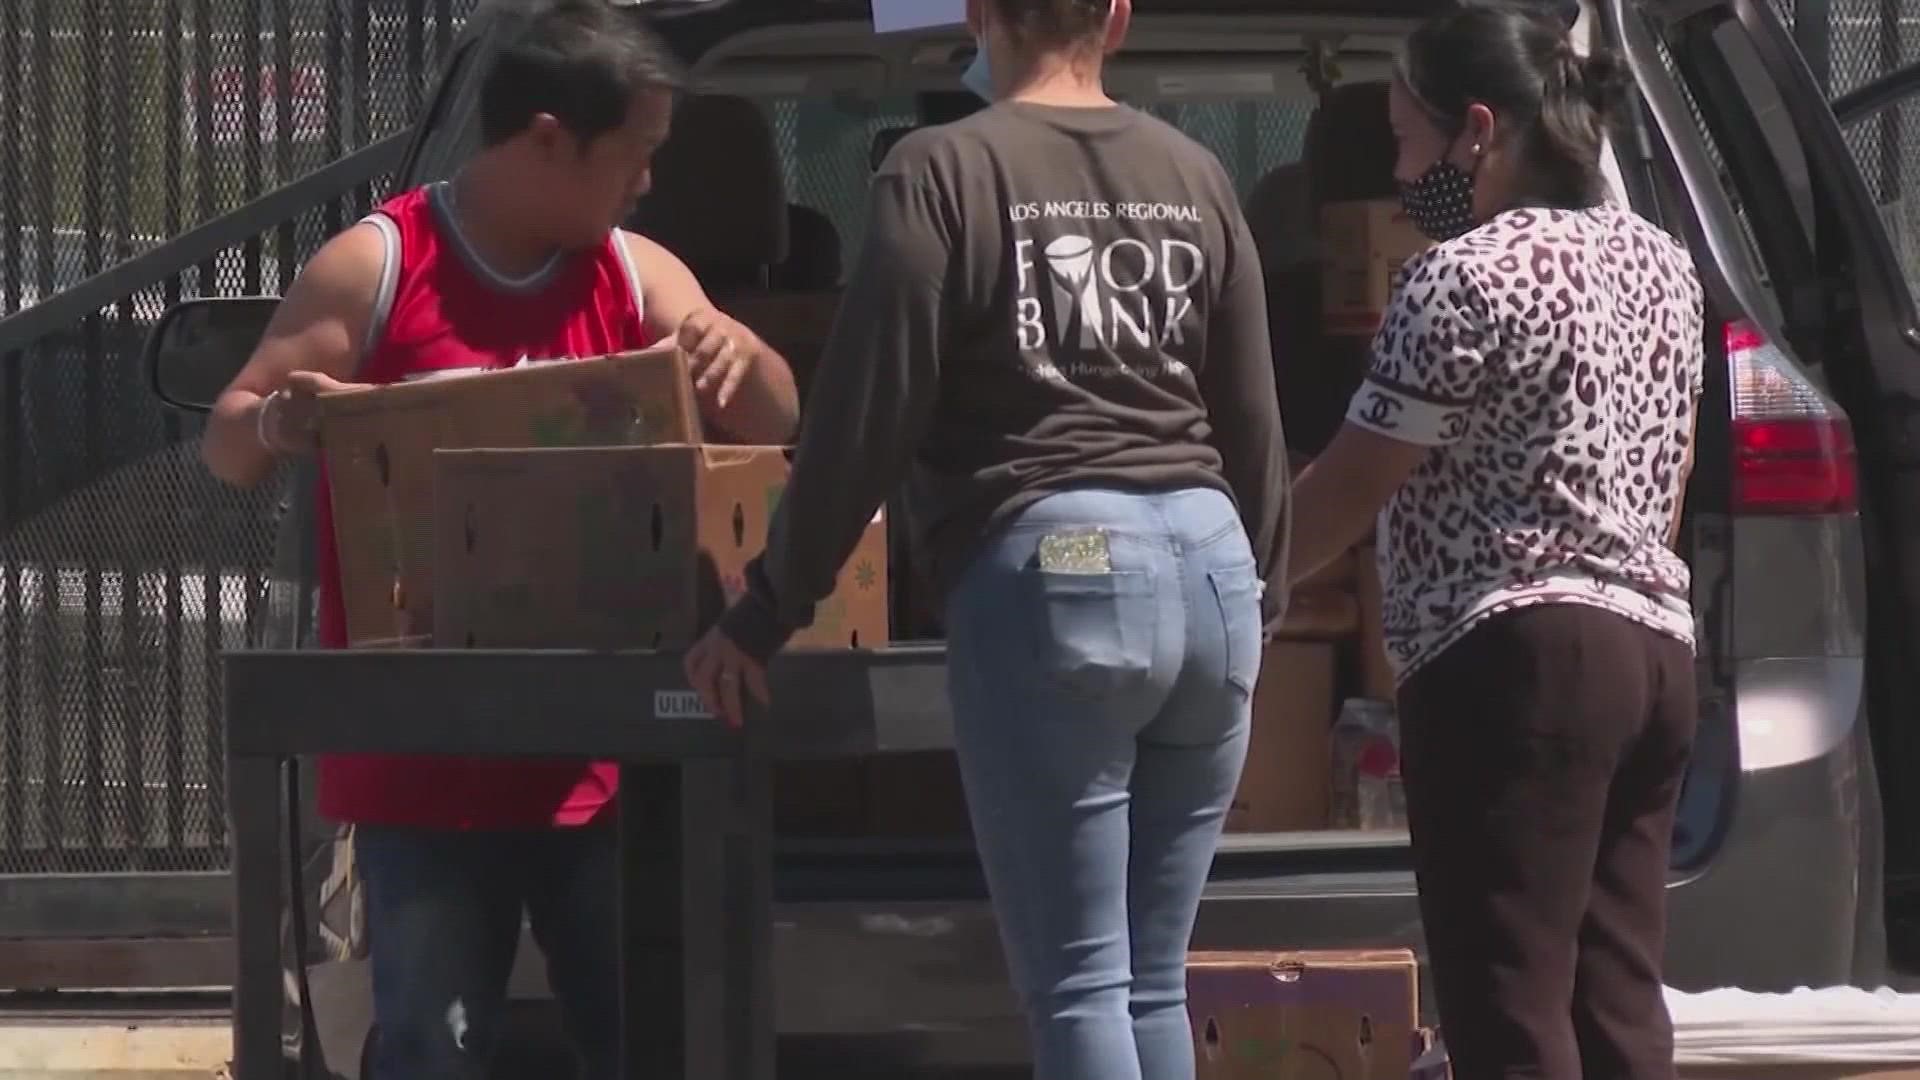 Summer is winding down and kids are returning to school, which means the San Antonio Food Banks Summer Meals program is coming to an end.